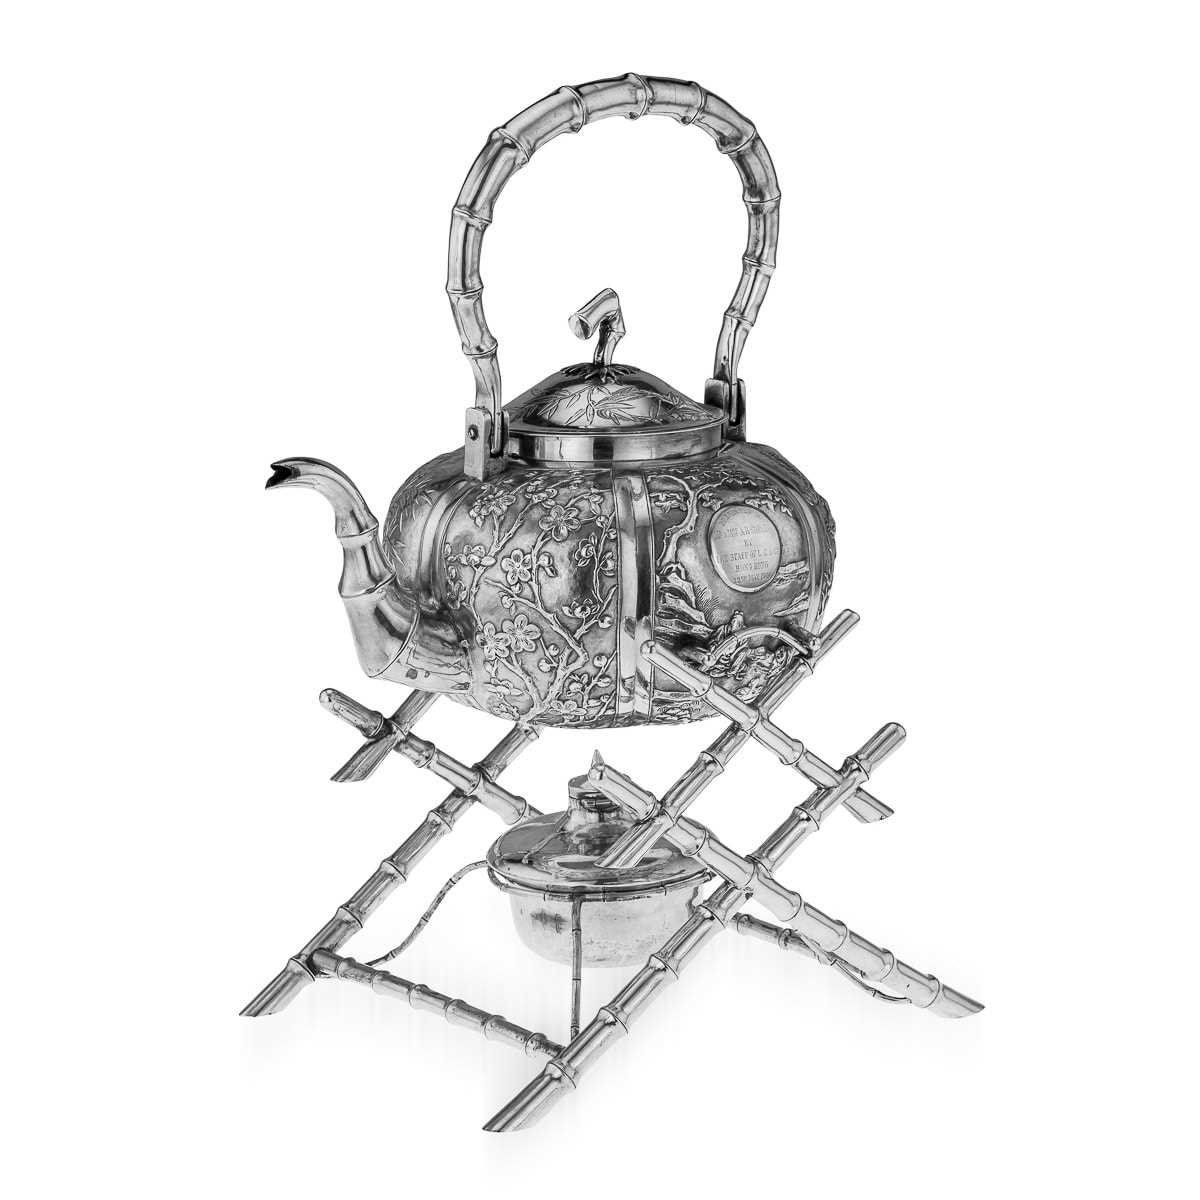 AN EARLY 20TH CENTURY CHINESE EXPORT SILVER KETTLE ON STAND, SUN SHING, C. 1900